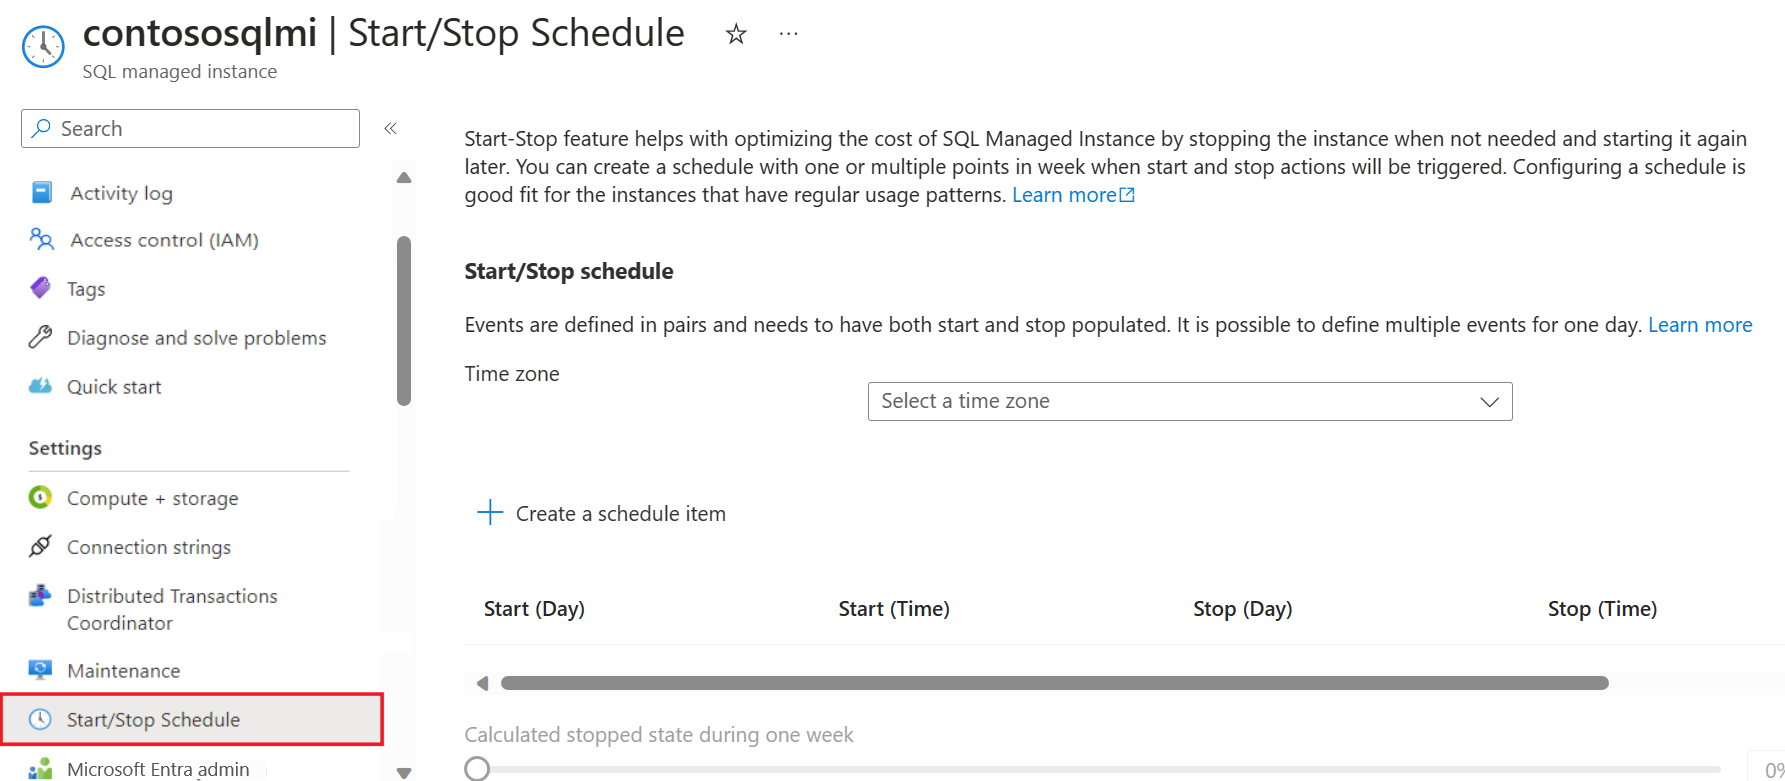 Screenshot of the 'Start/Stop schedule' page of the managed instance.